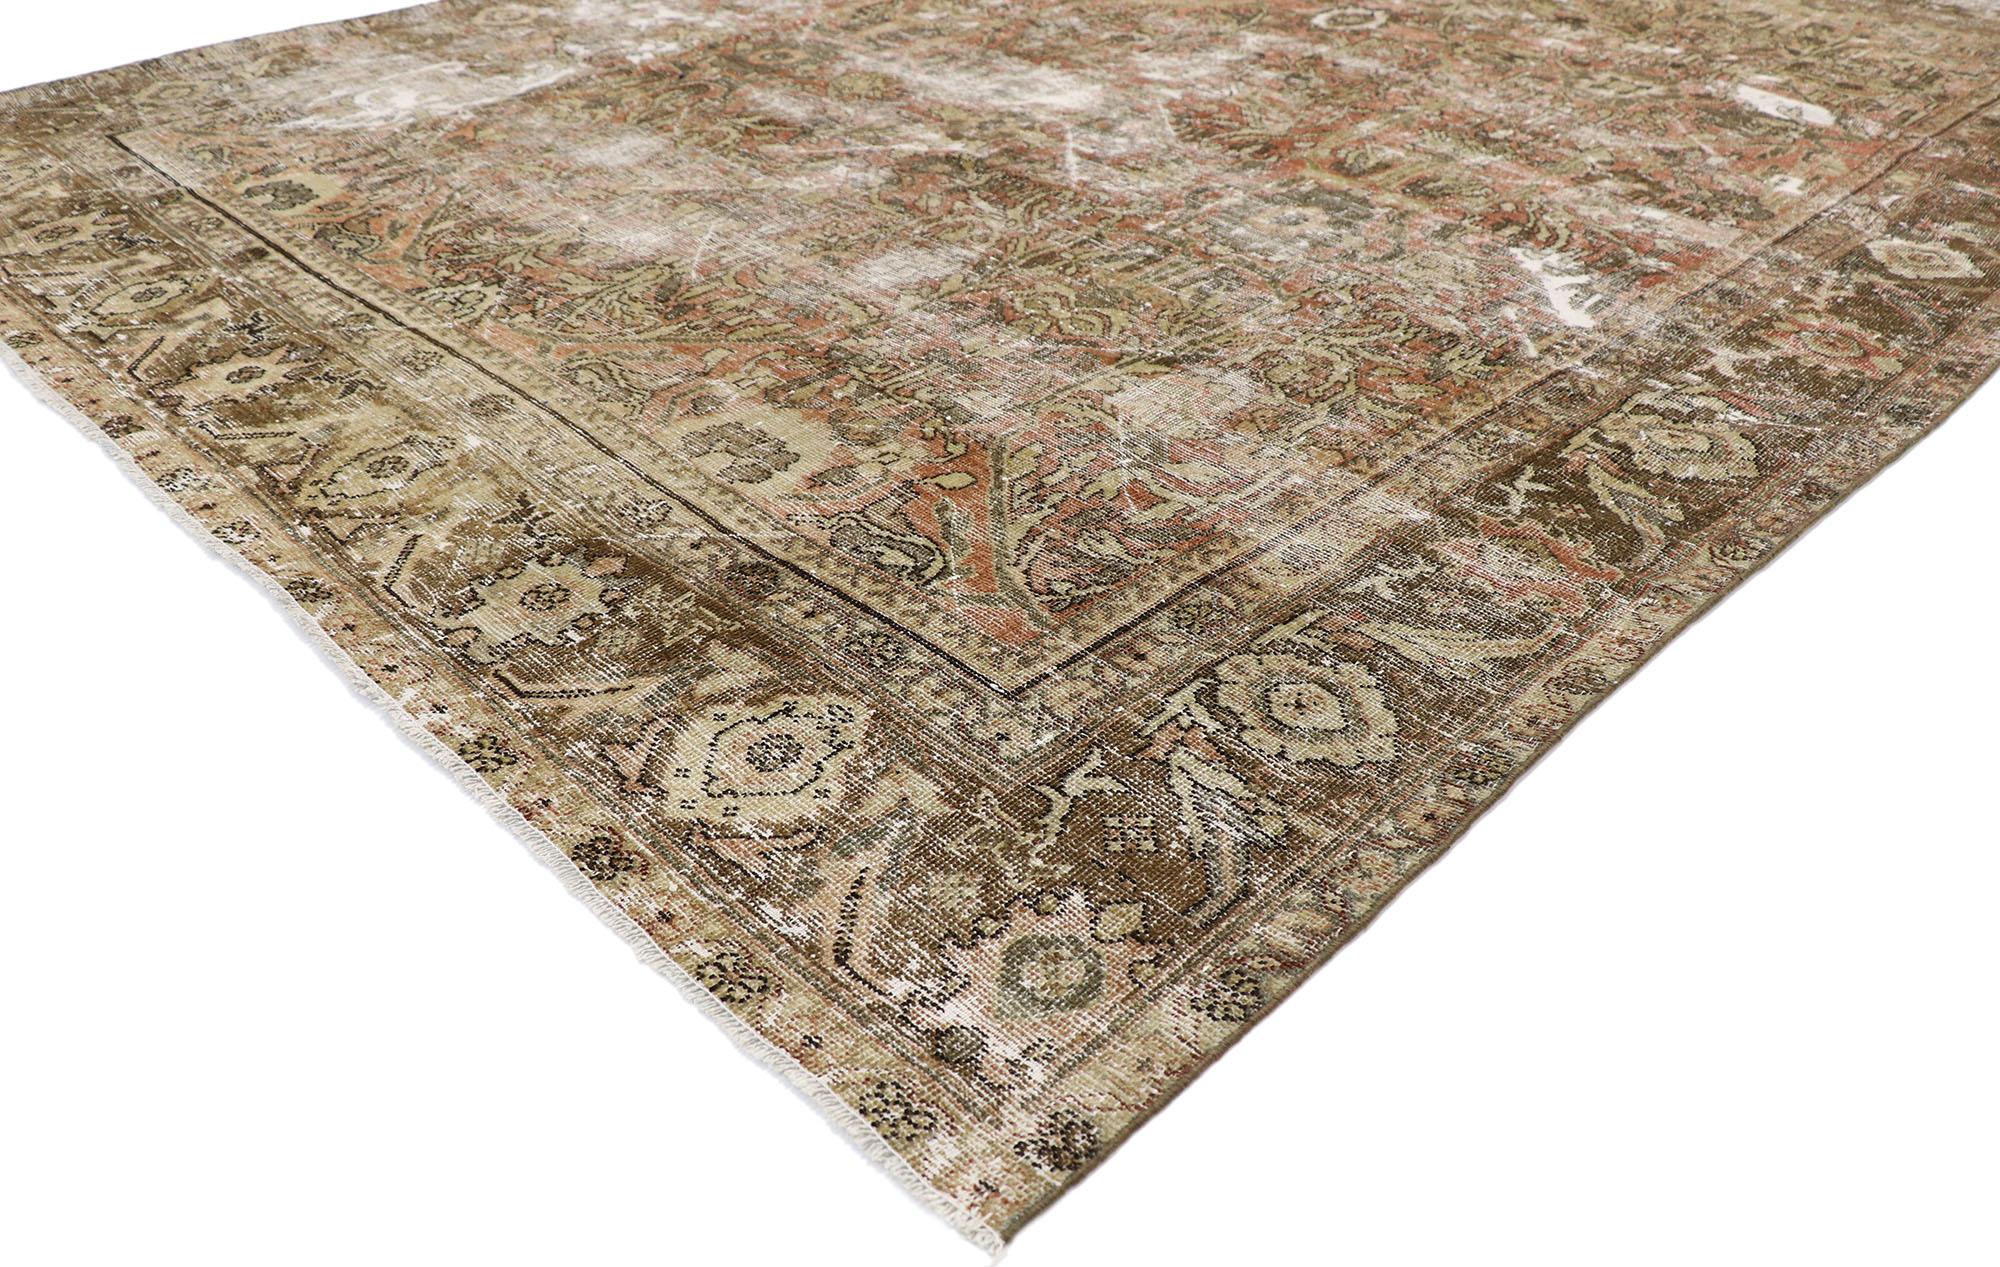 60829 distressed antique Persian Mahal rug with Modern Rustic style. With ornate details and a lovingly time-worn composition, this hand knotted wool distressed antique Persian Mahal rug is poised to impress. The weathered field features an all-over